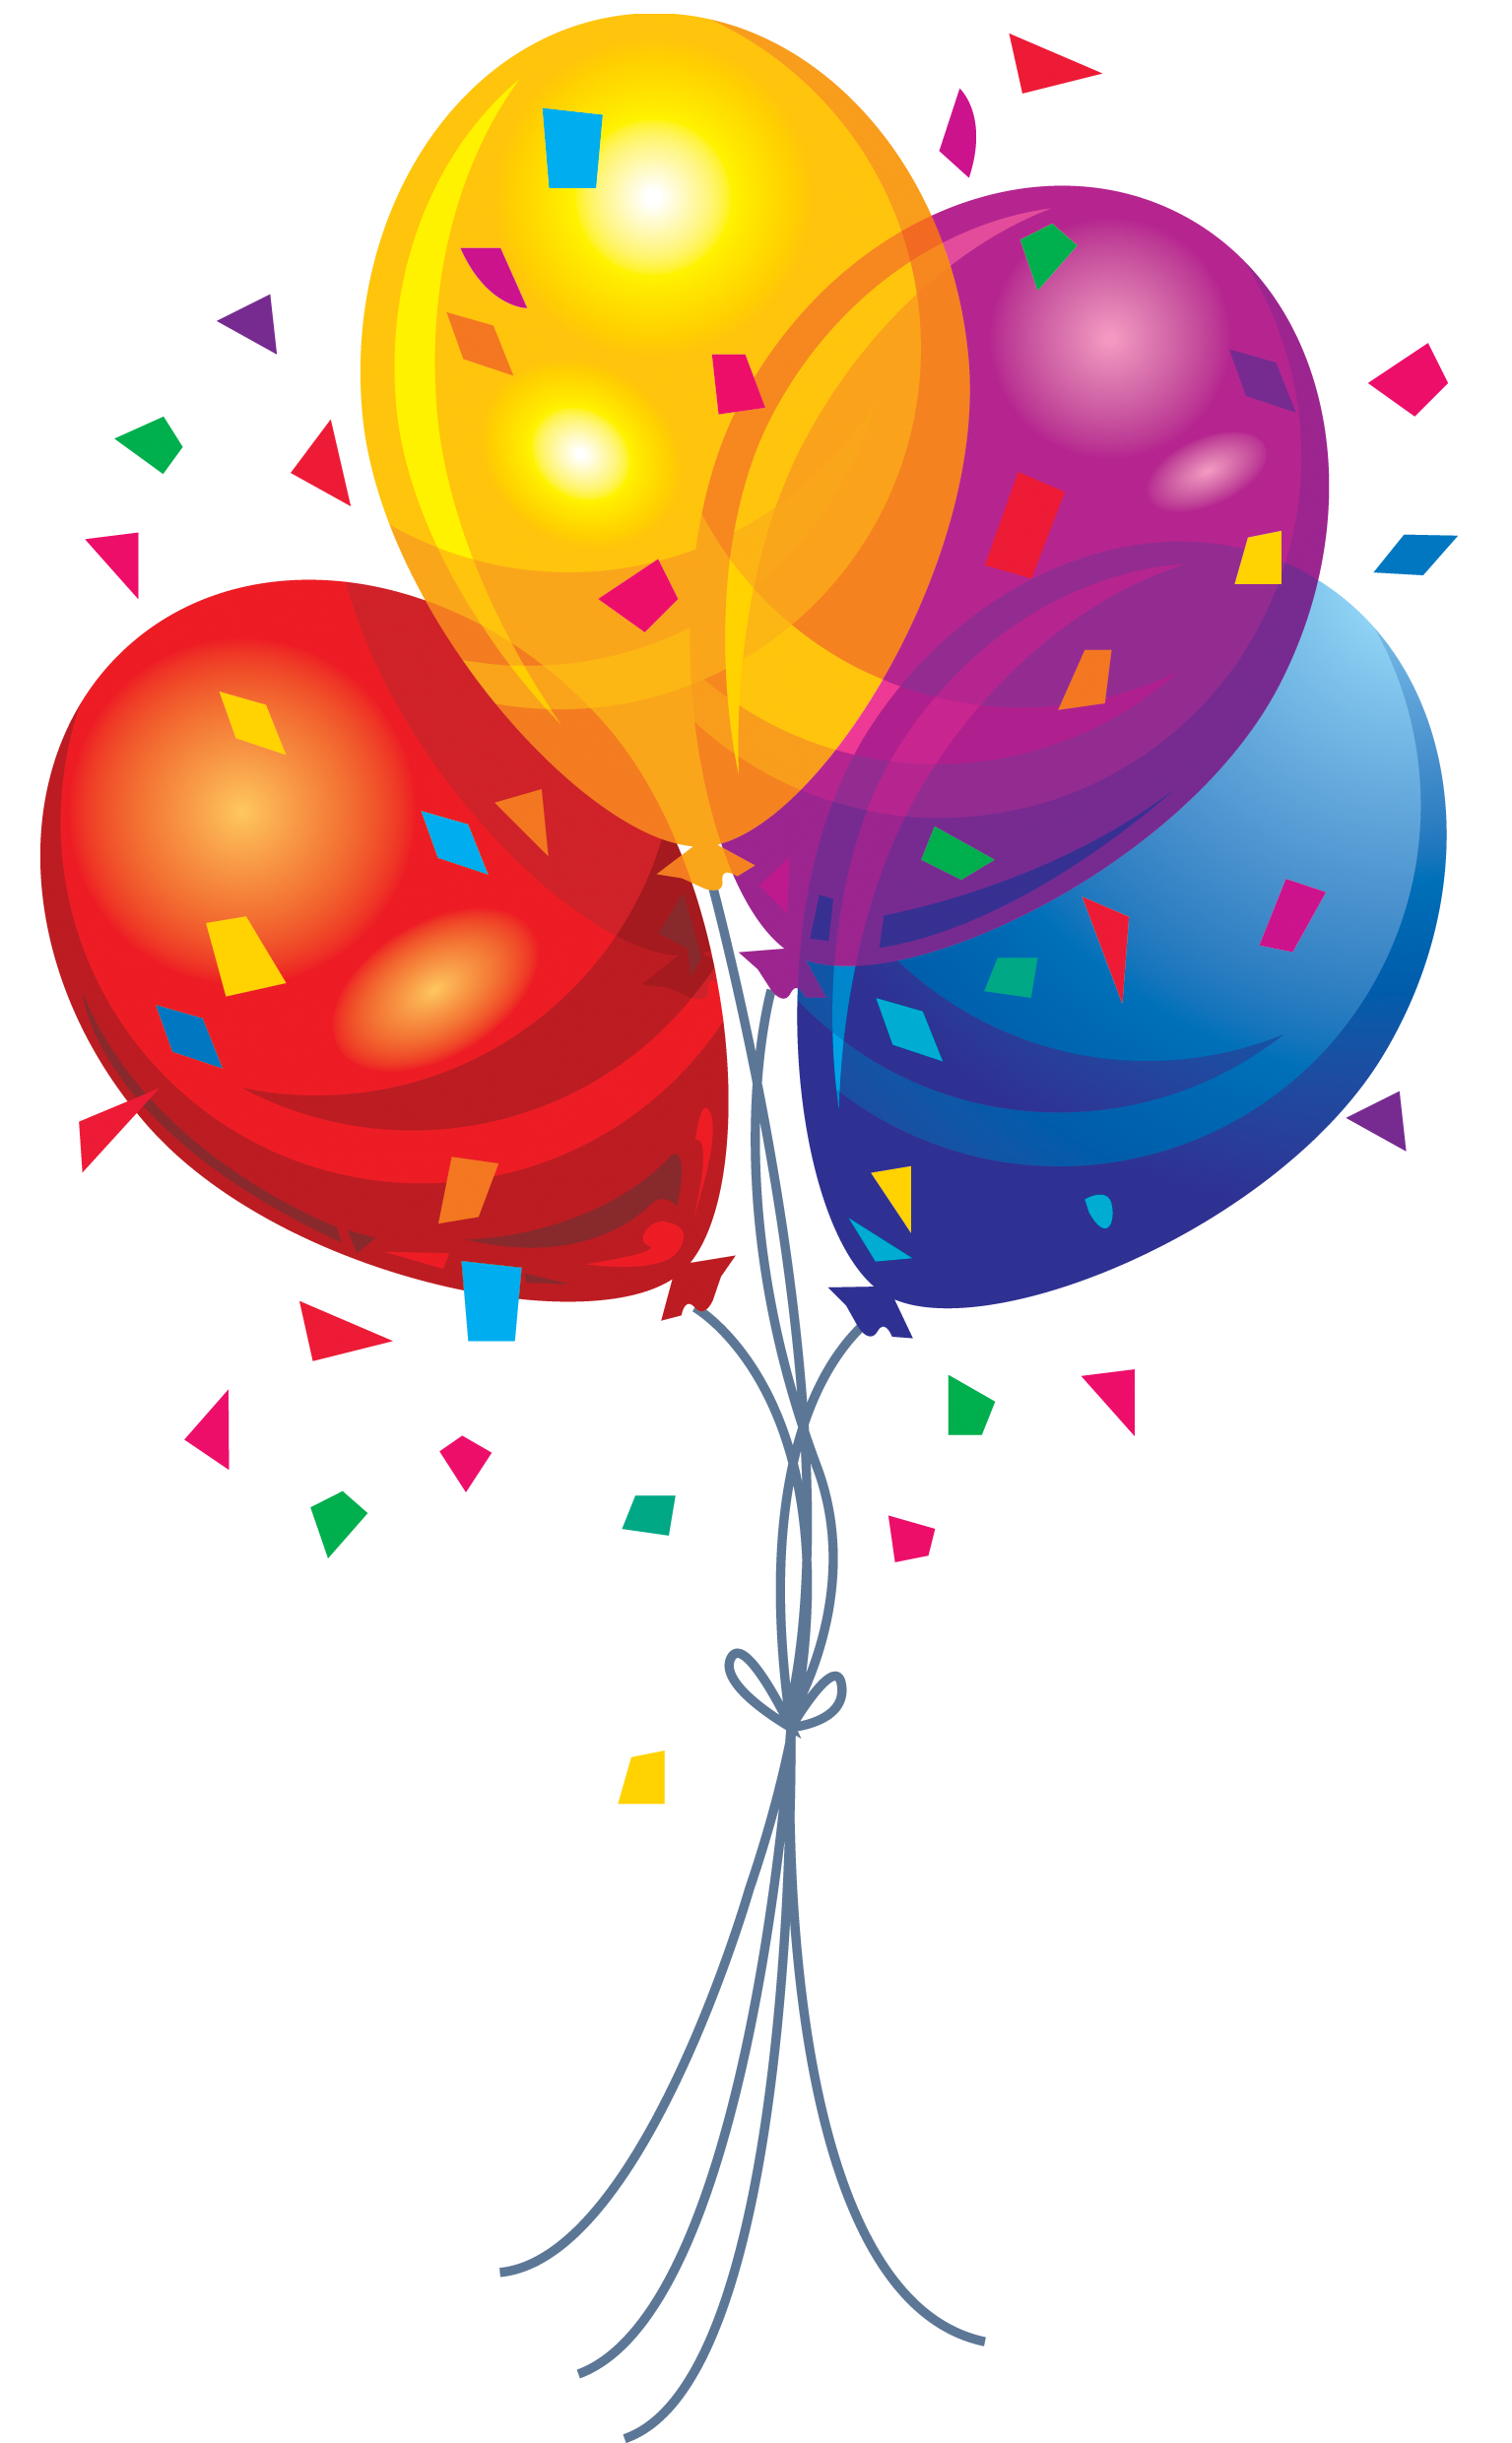 Balloon images png. Free picture download with